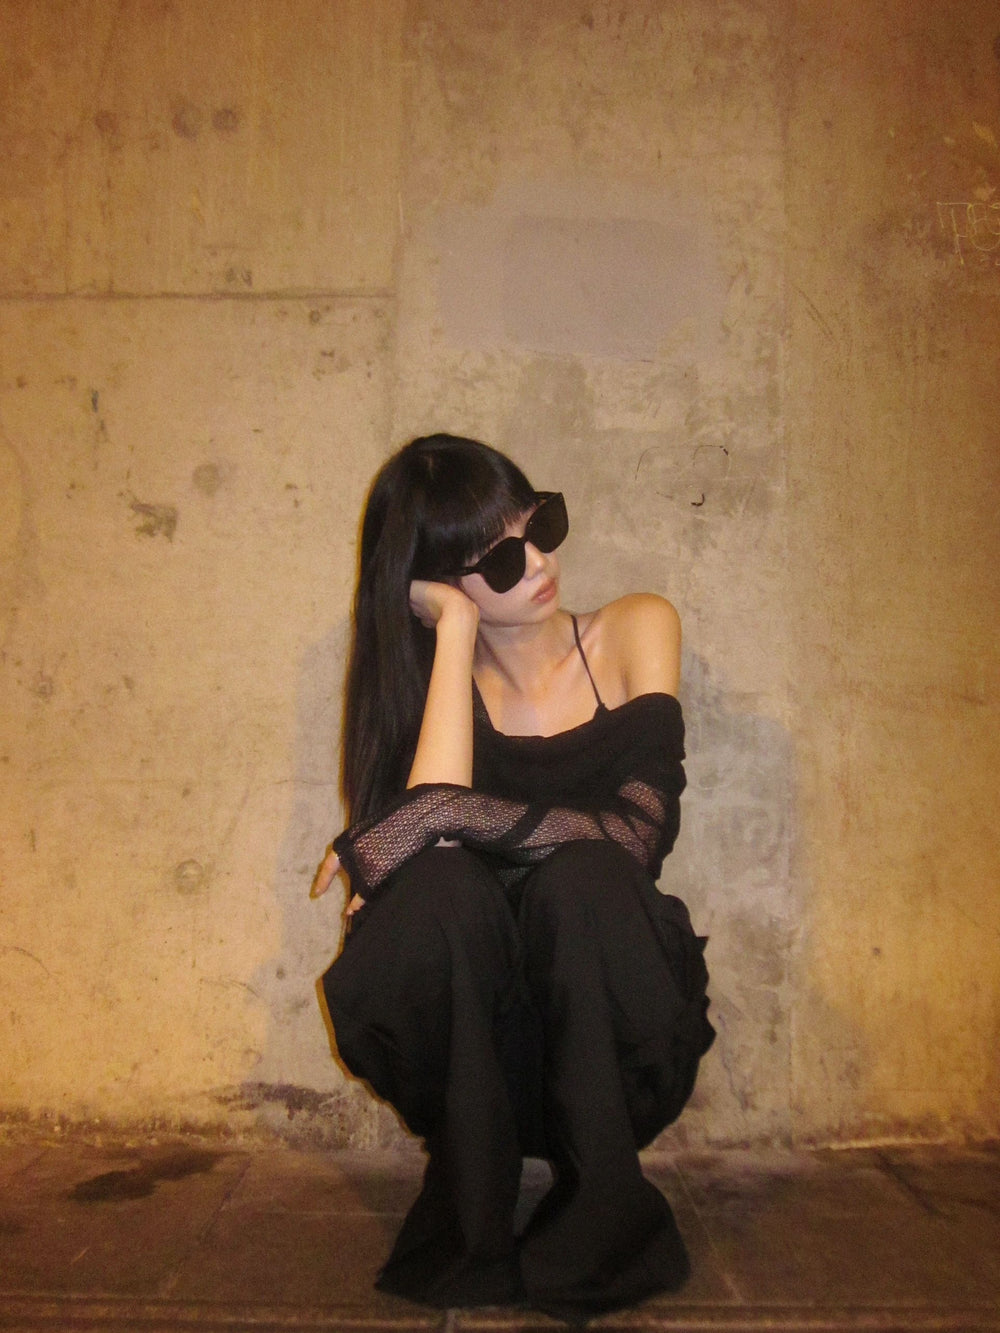 A woman in distress, sitting on the ground, holding her head in her hands wearing her Korean fashionable sunglasses.